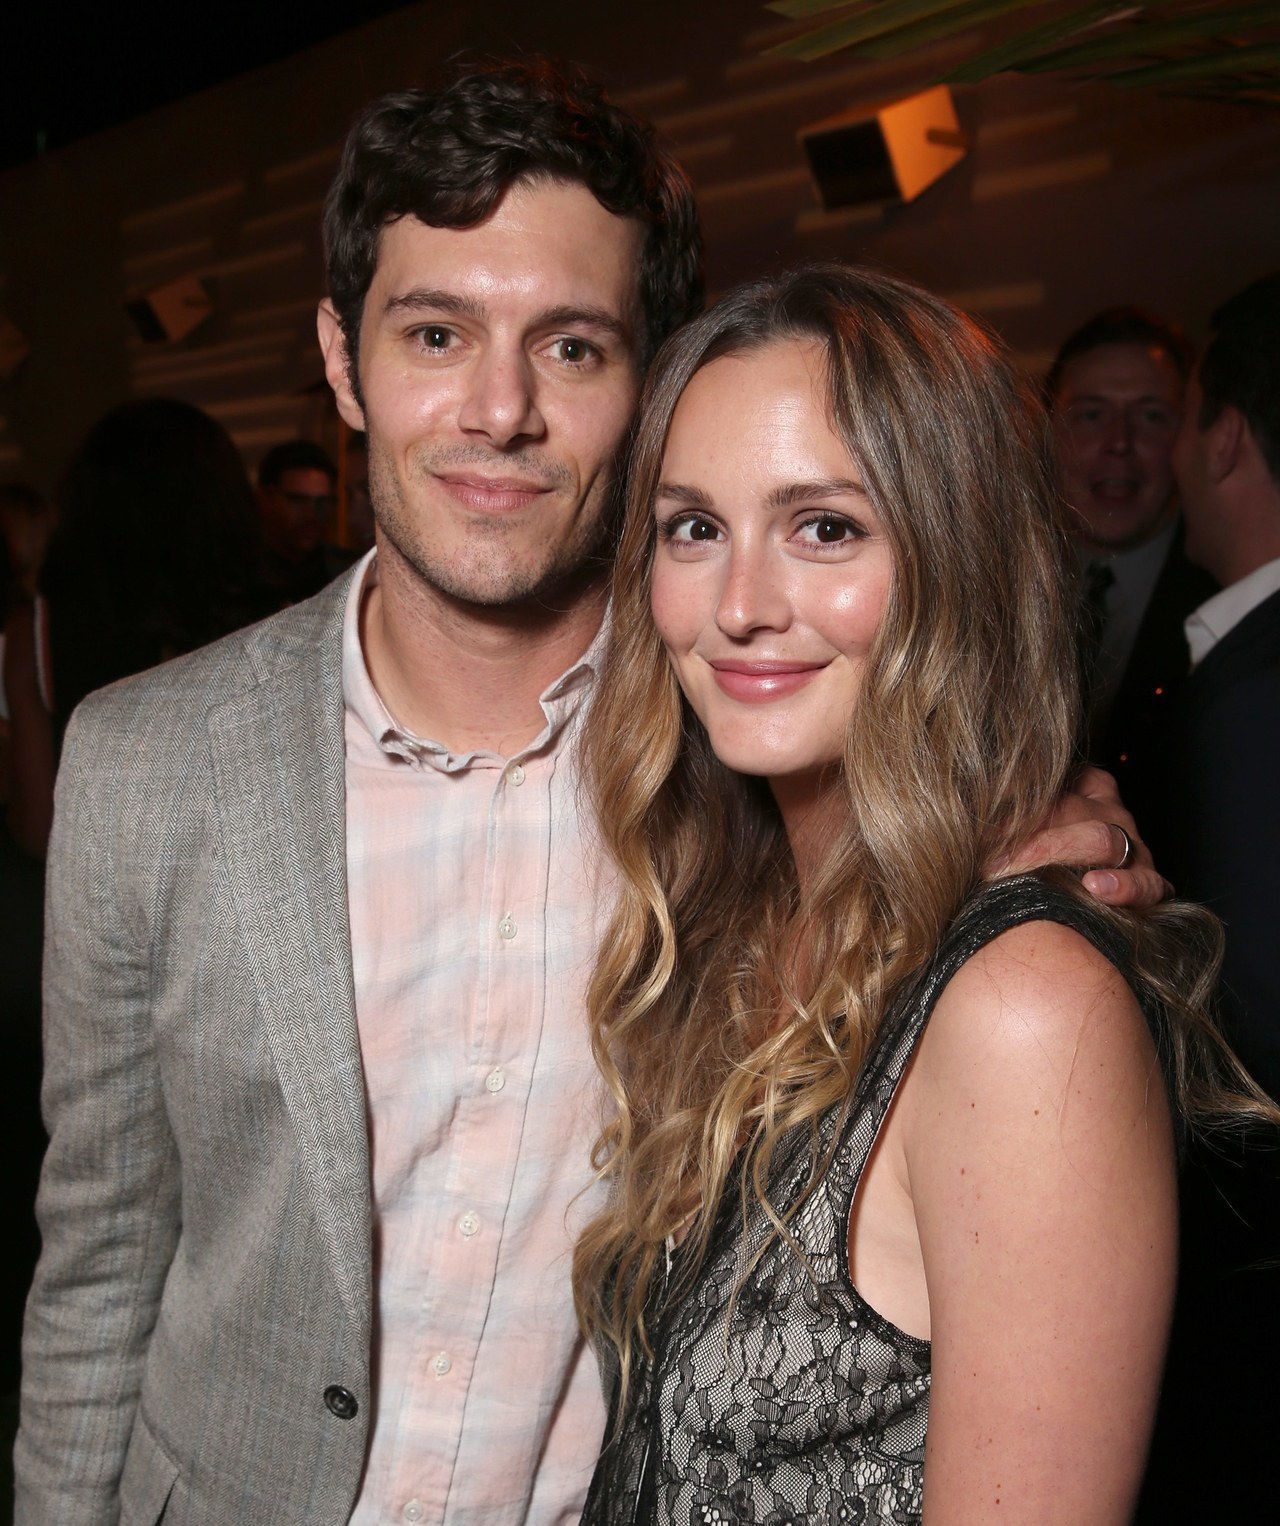 LOS ANGELES, CA - AUGUST 23: Adam Brody and Leighton Meester attend the after party for the premiere pf Crackle's 